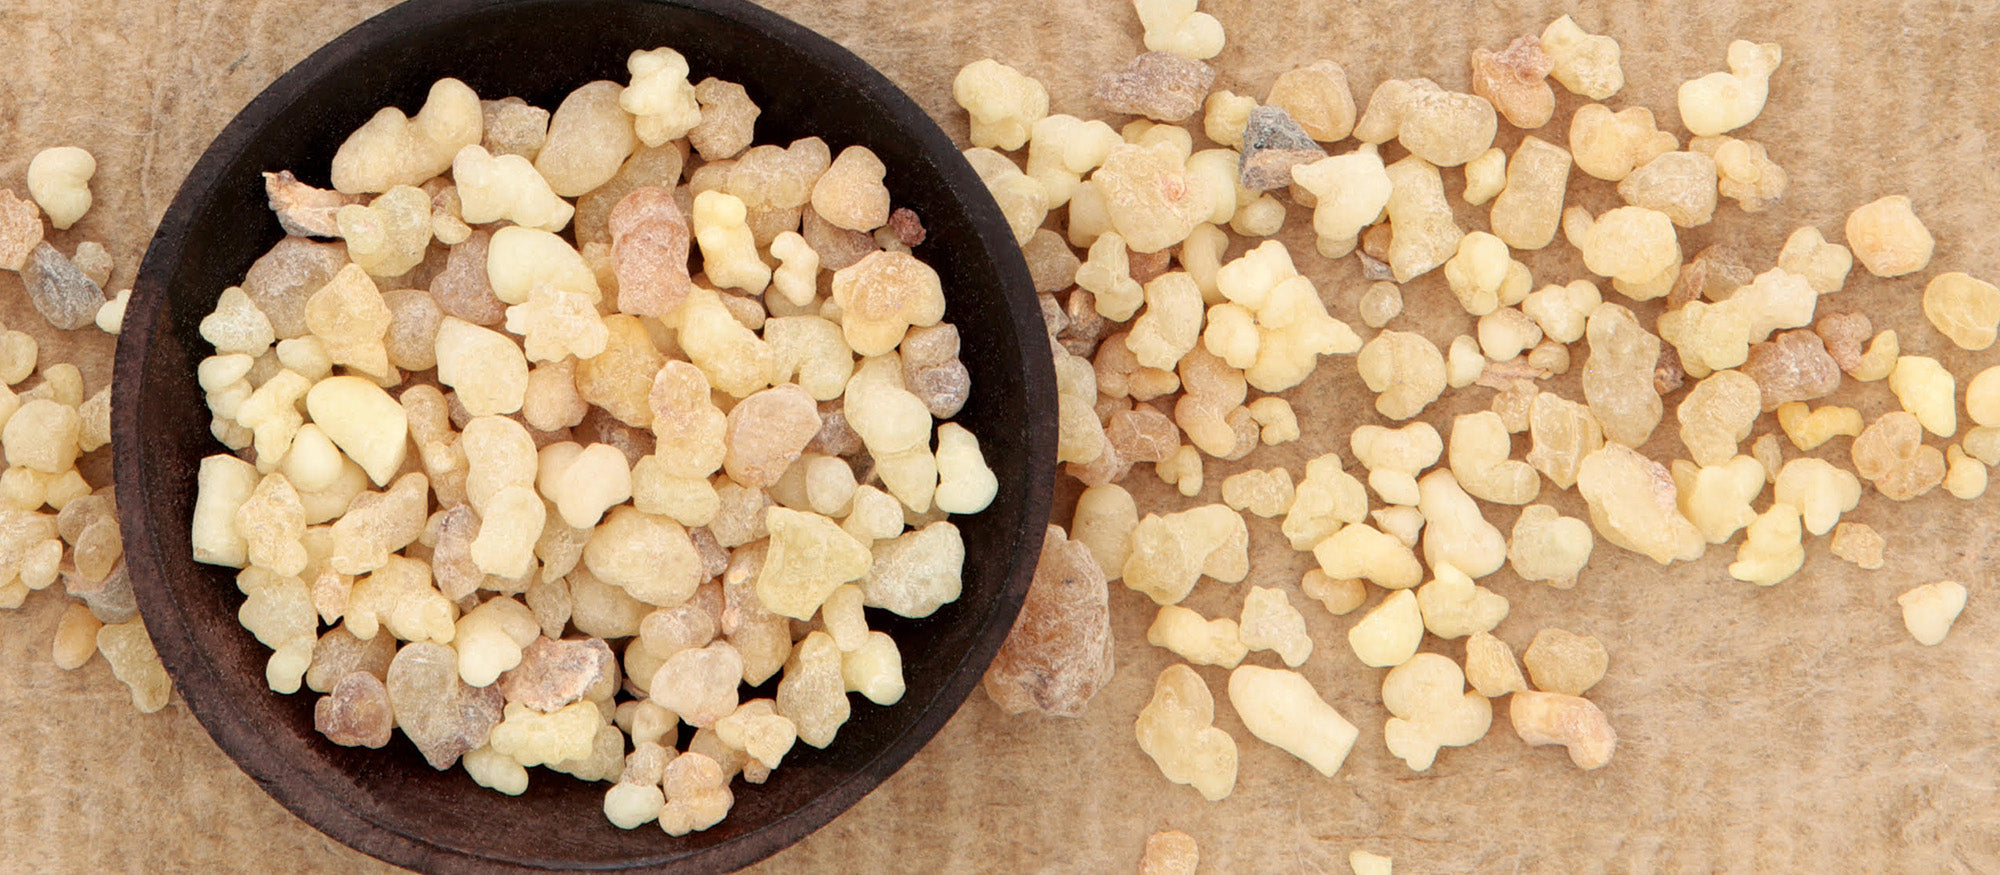 Frankincense resin before distilled into essential oil